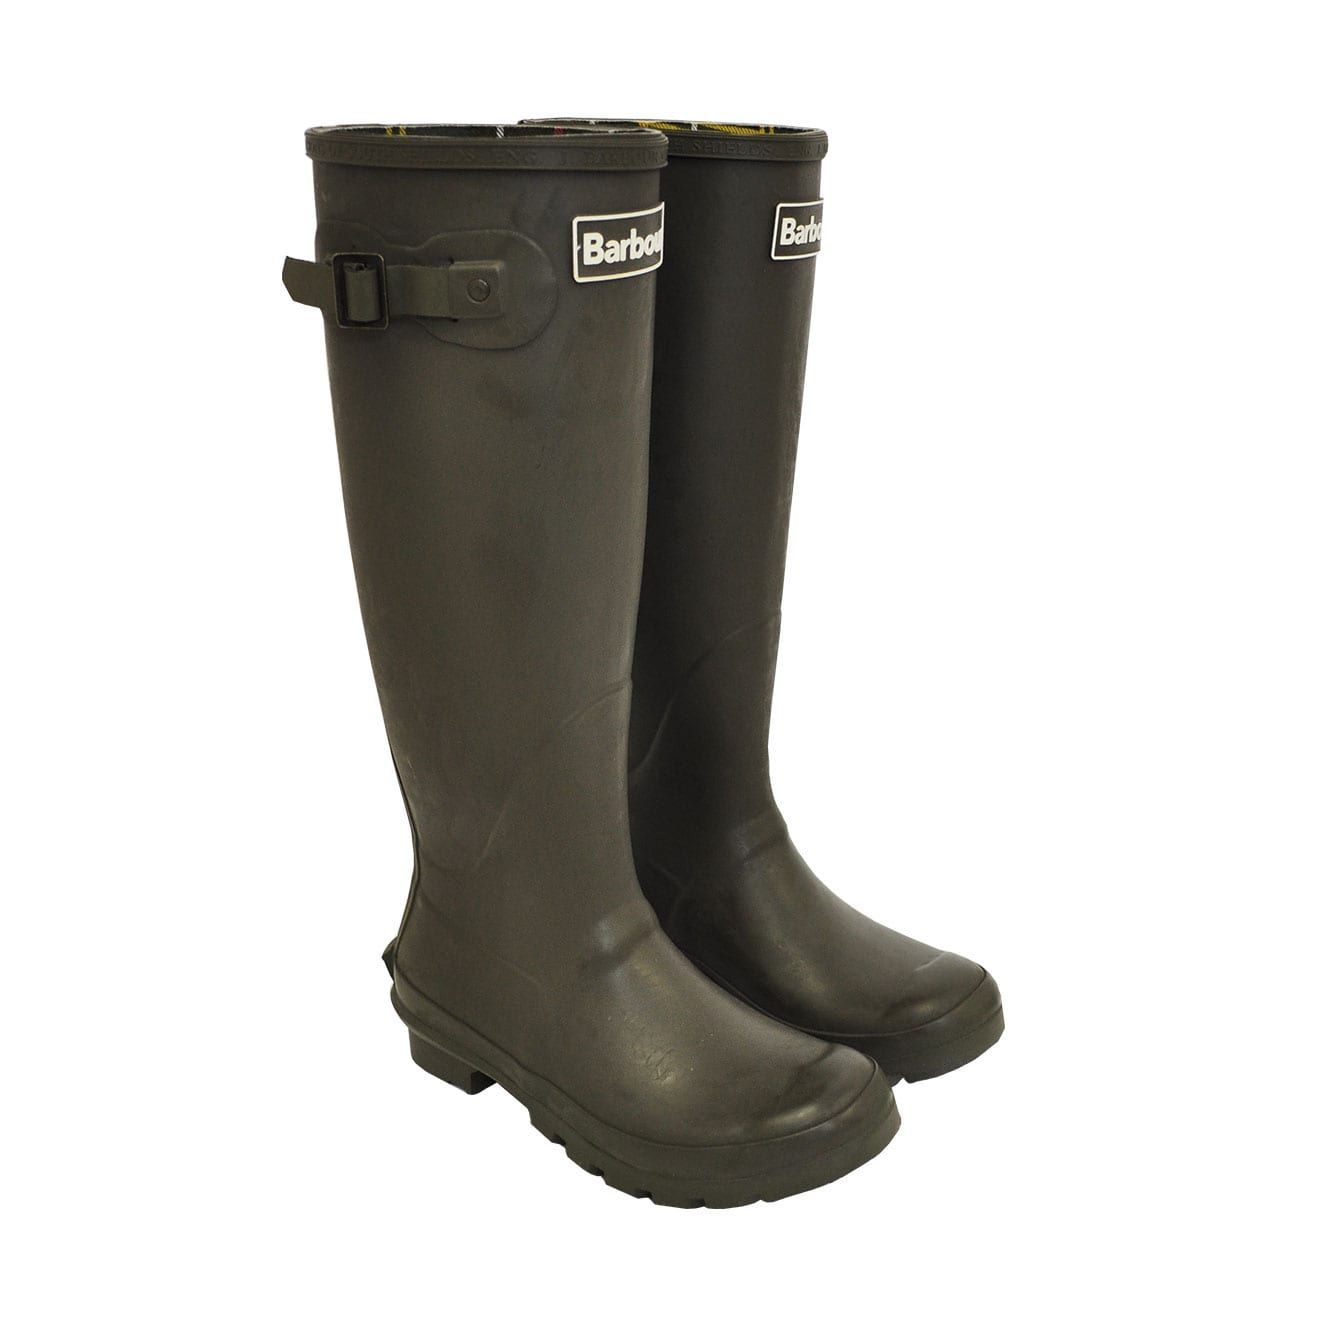 barbour wellies womens sale